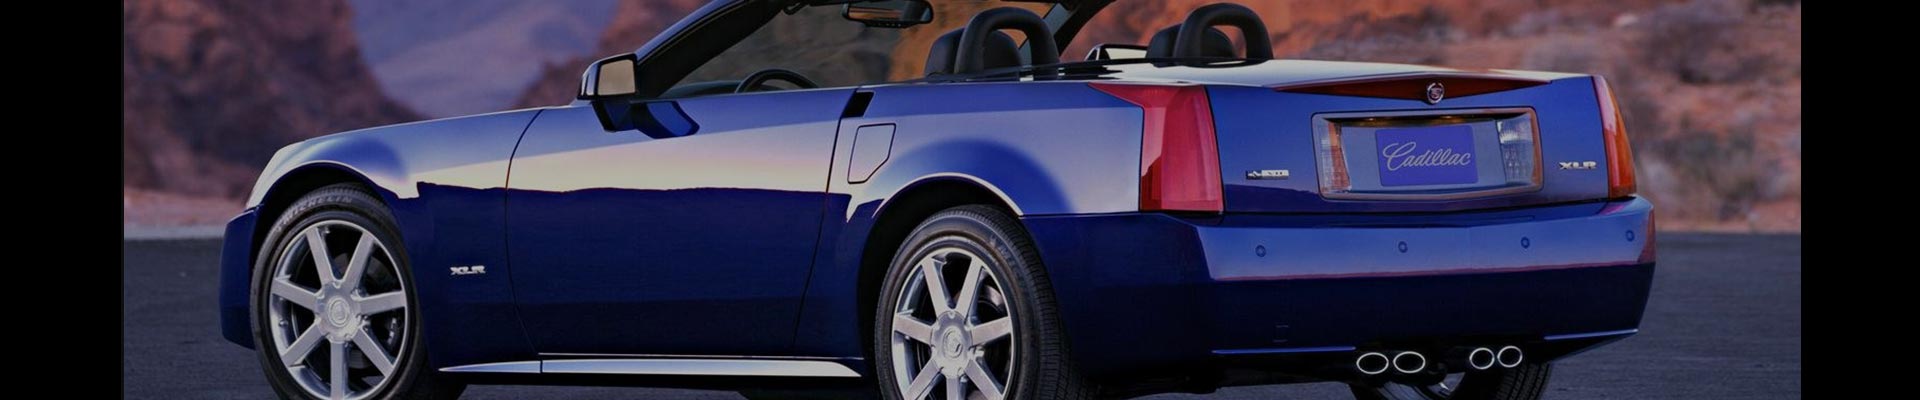 Shop Replacement and OEM Cadillac XLR Parts with Discounted Price on the Net